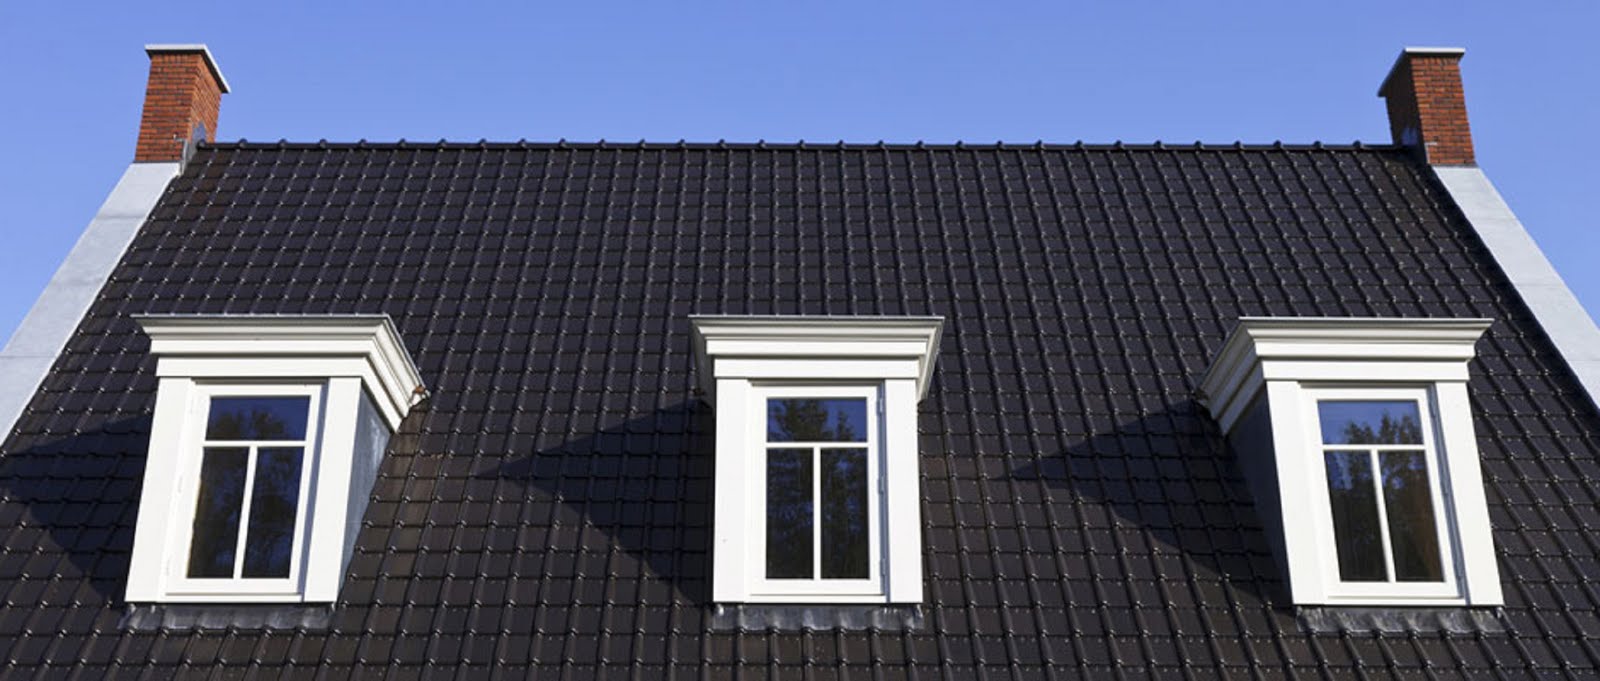 Prime Roofing Services